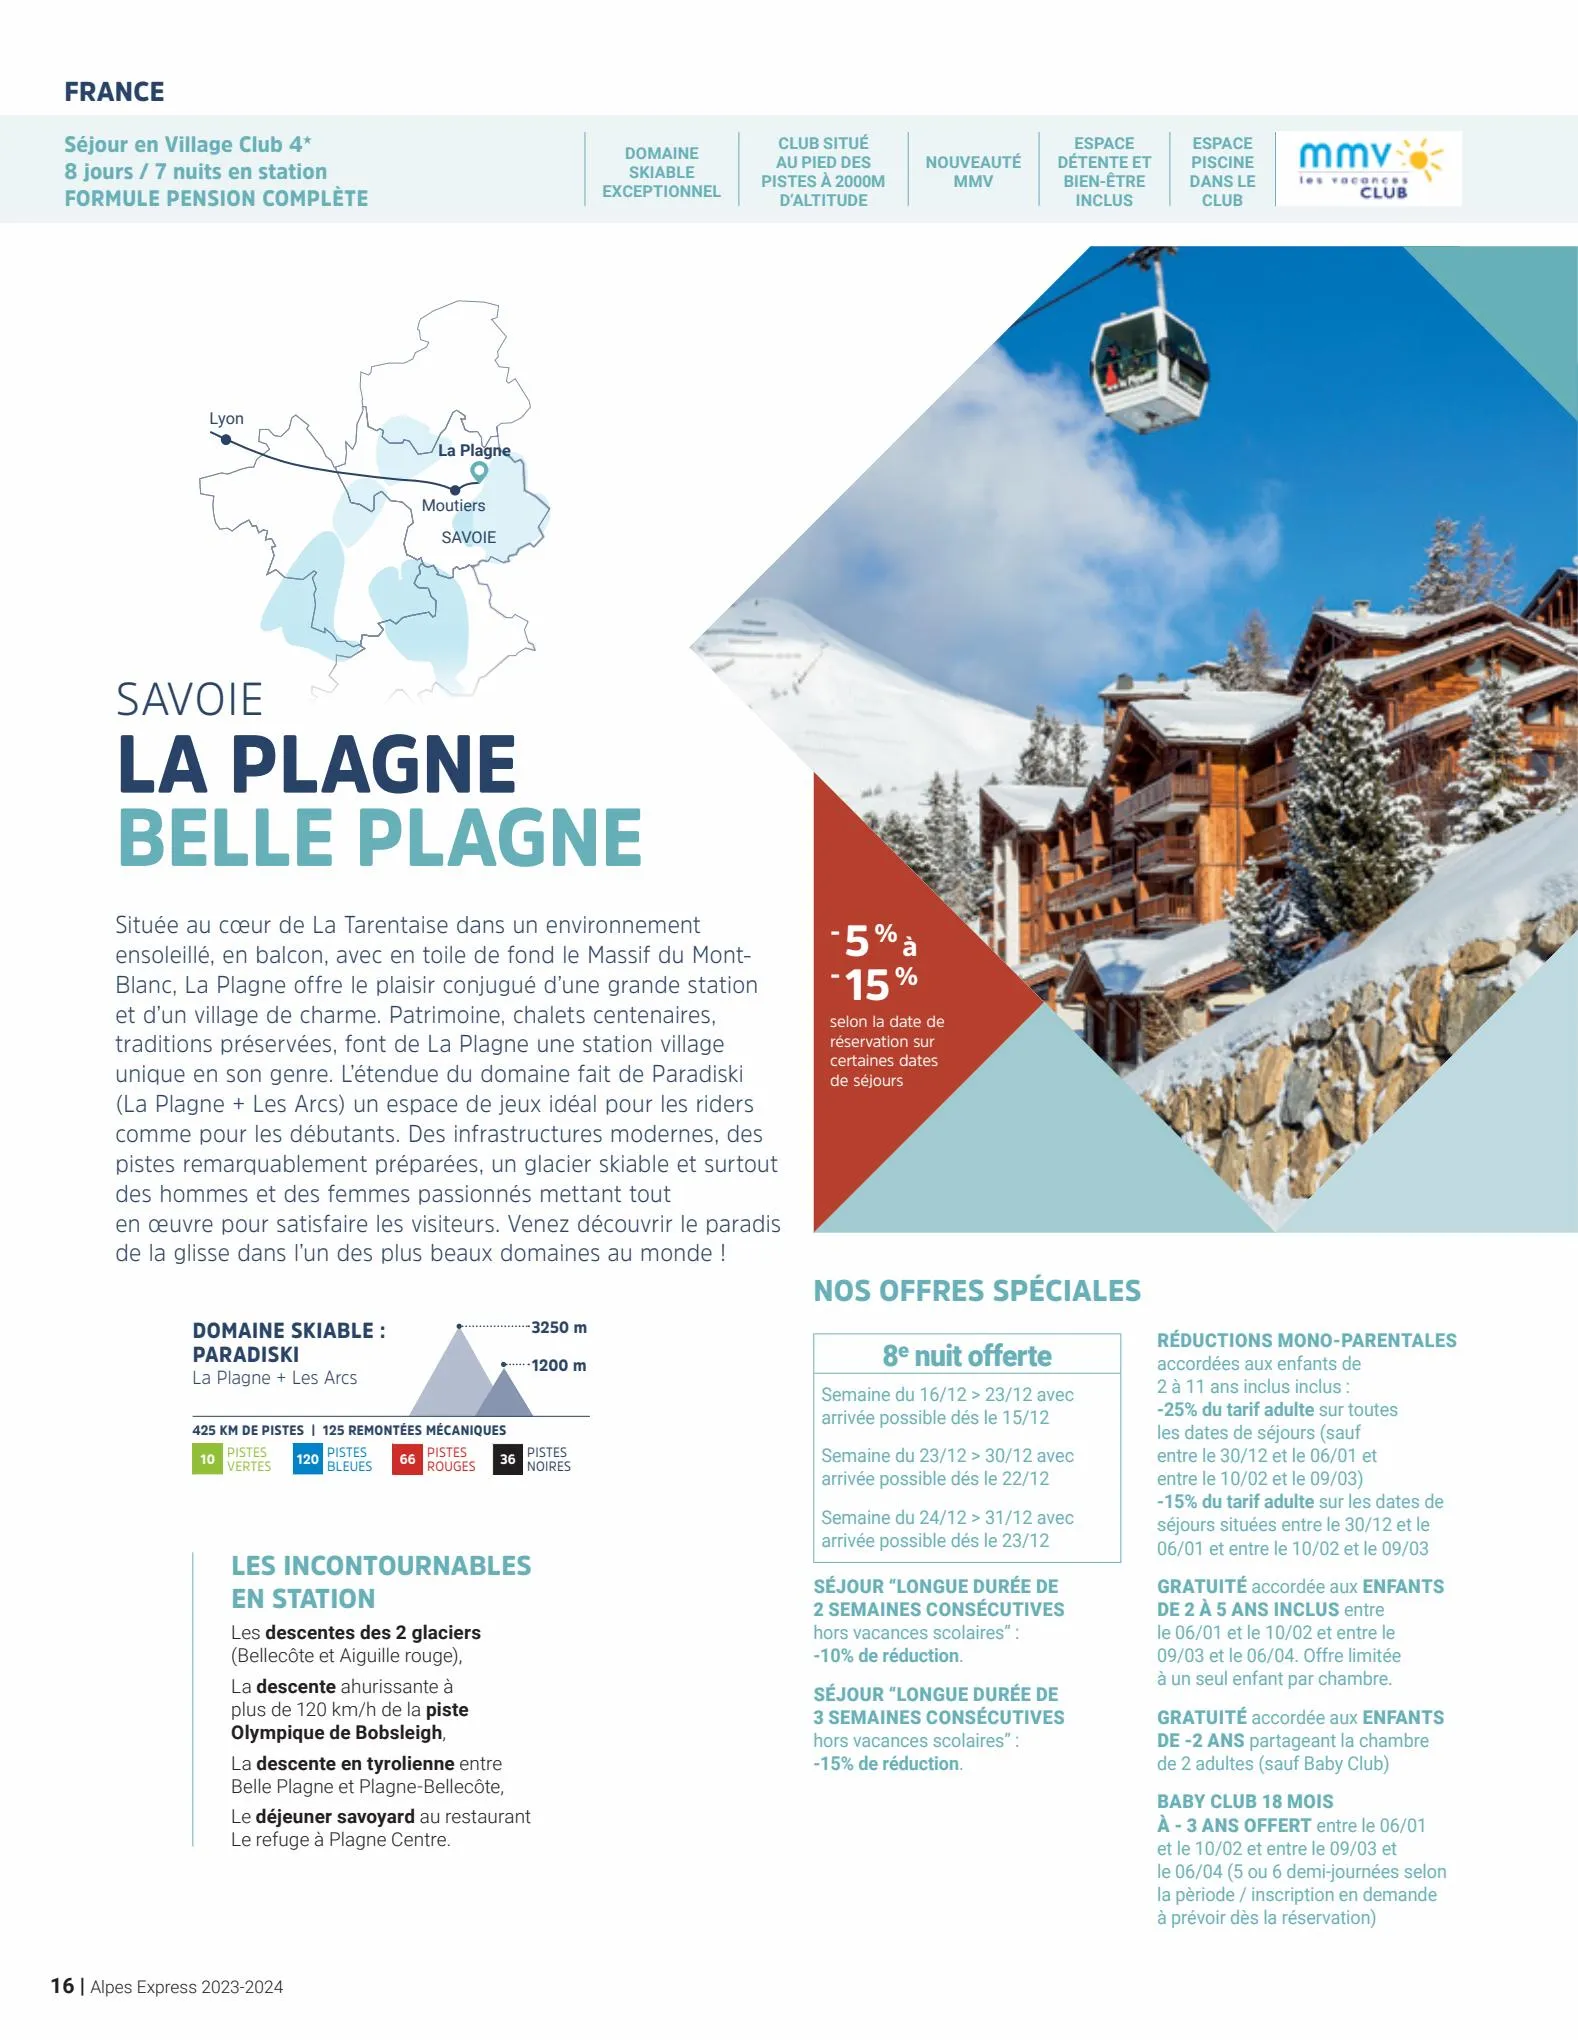 Catalogue Alpes Express - Hiver 2023 - 2024, page 00016